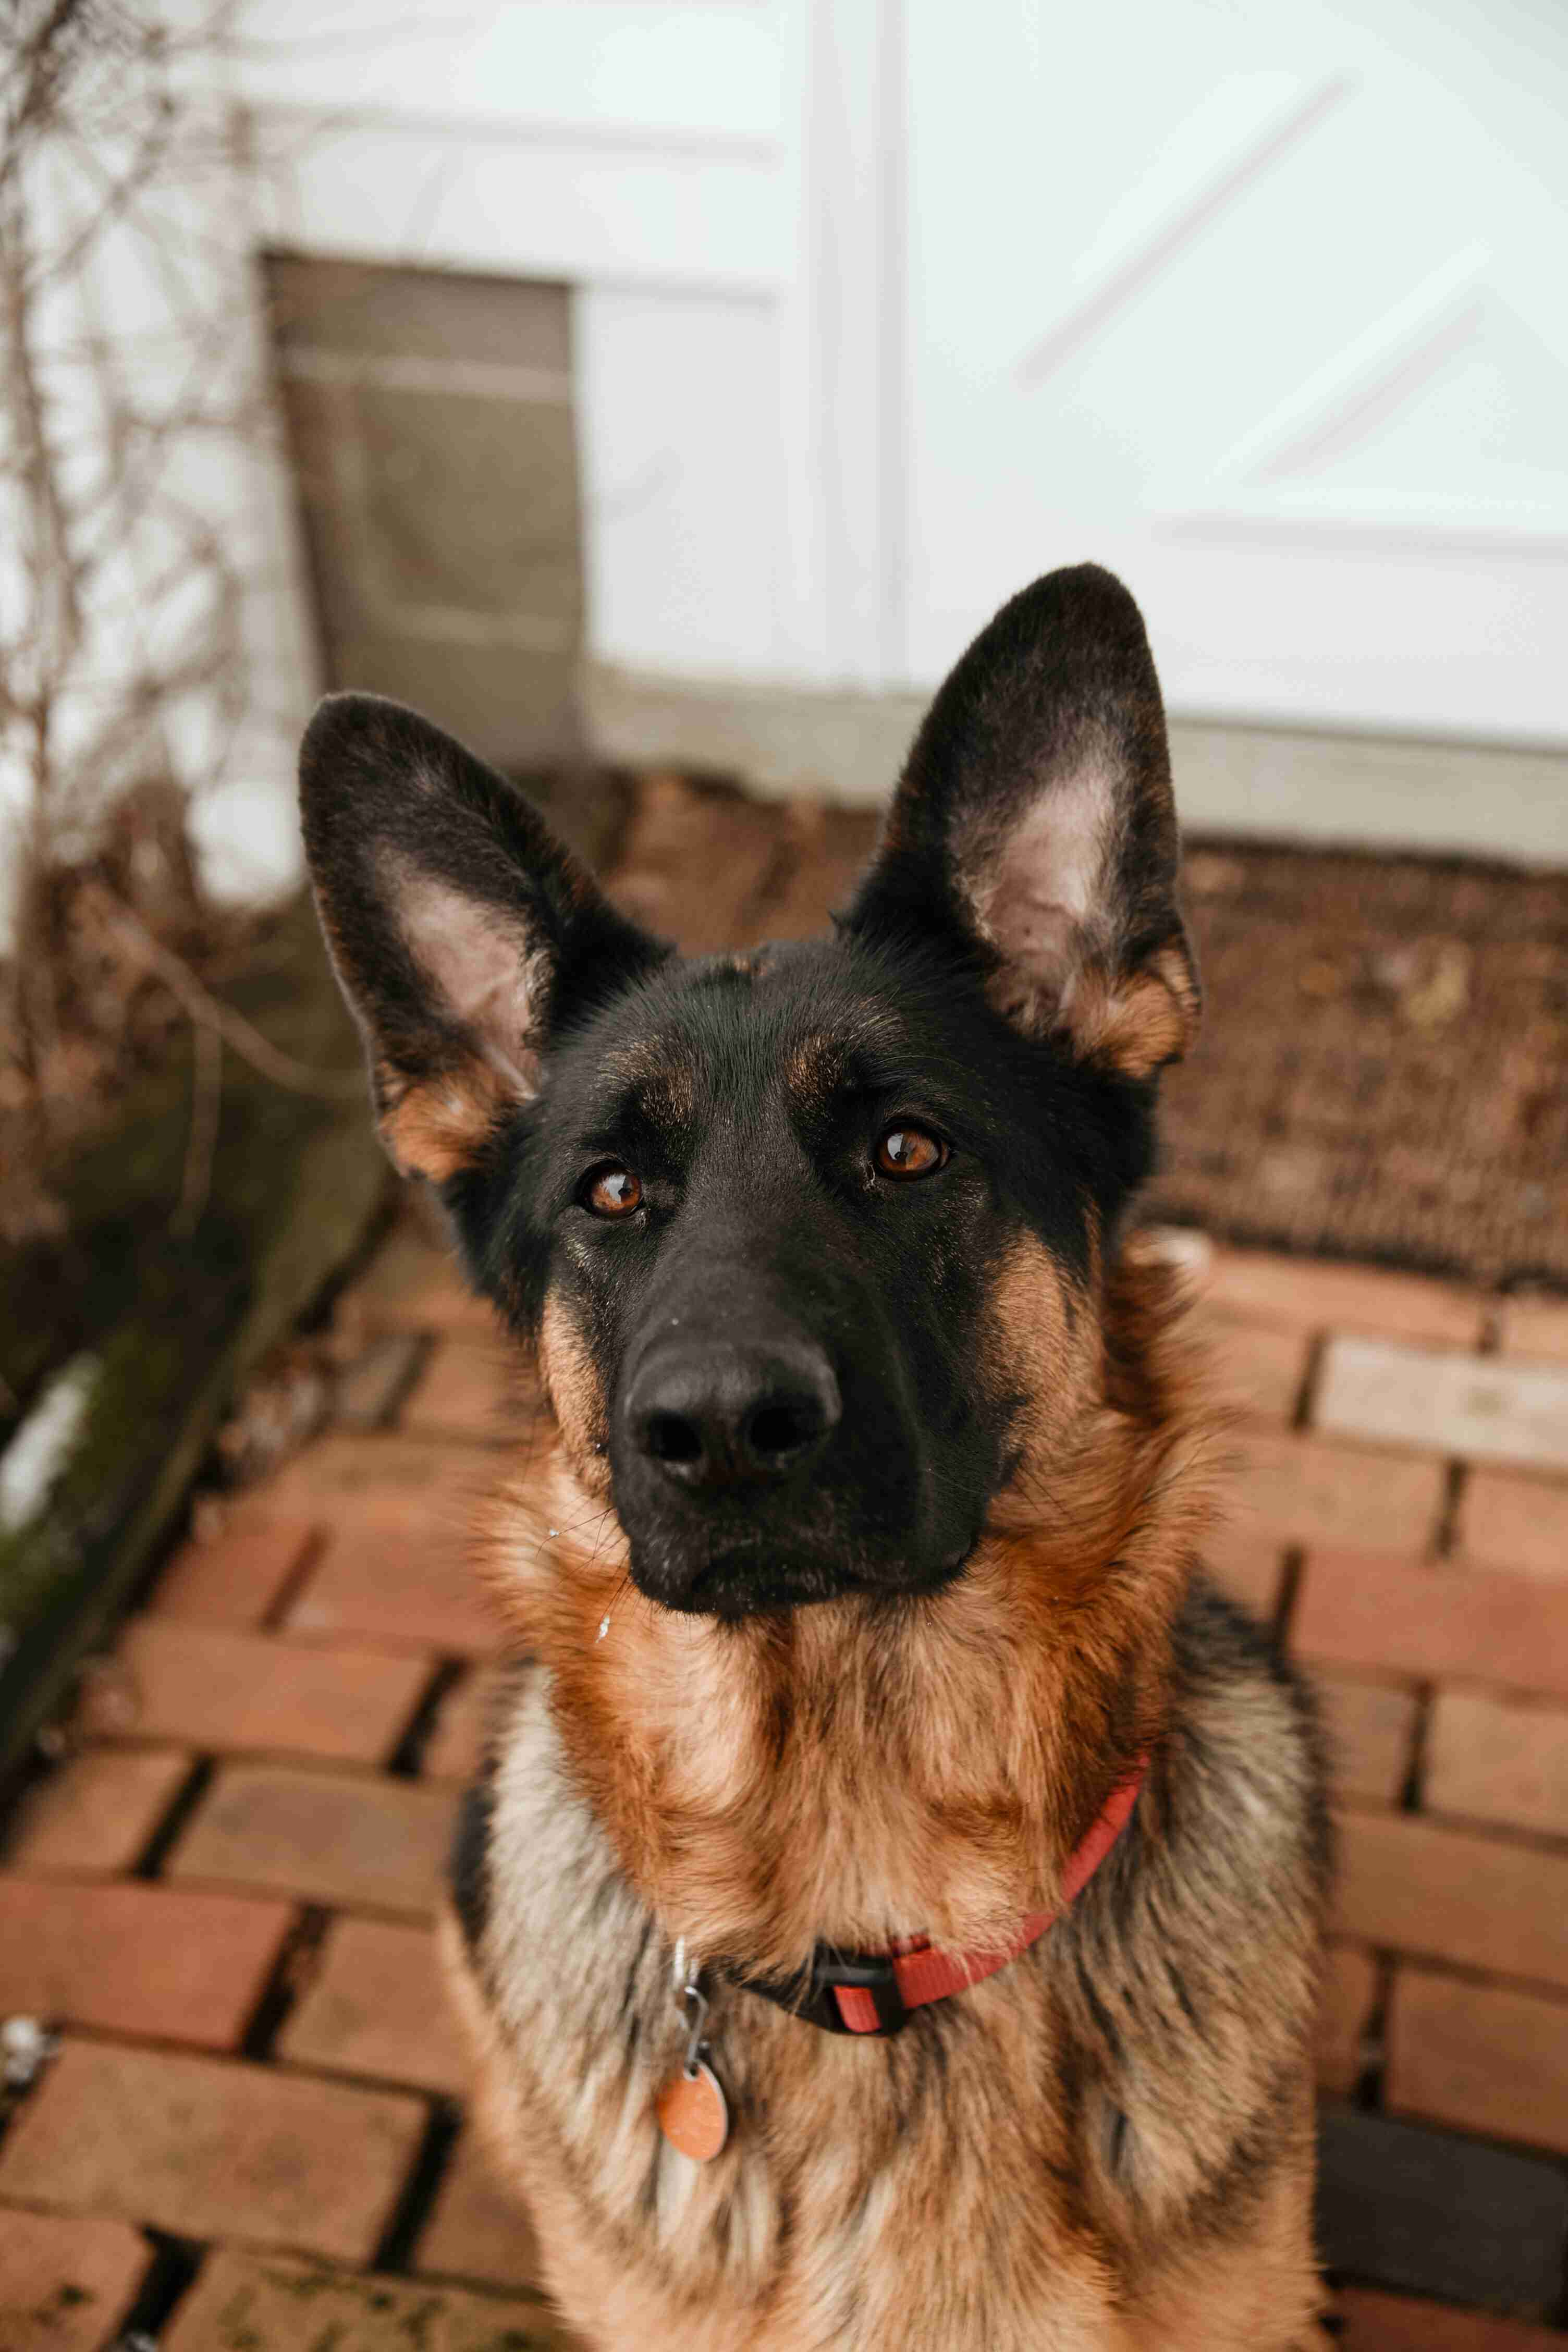 What are some good ways to teach a German Shepherd puppy to not be afraid of vacuum cleaners?